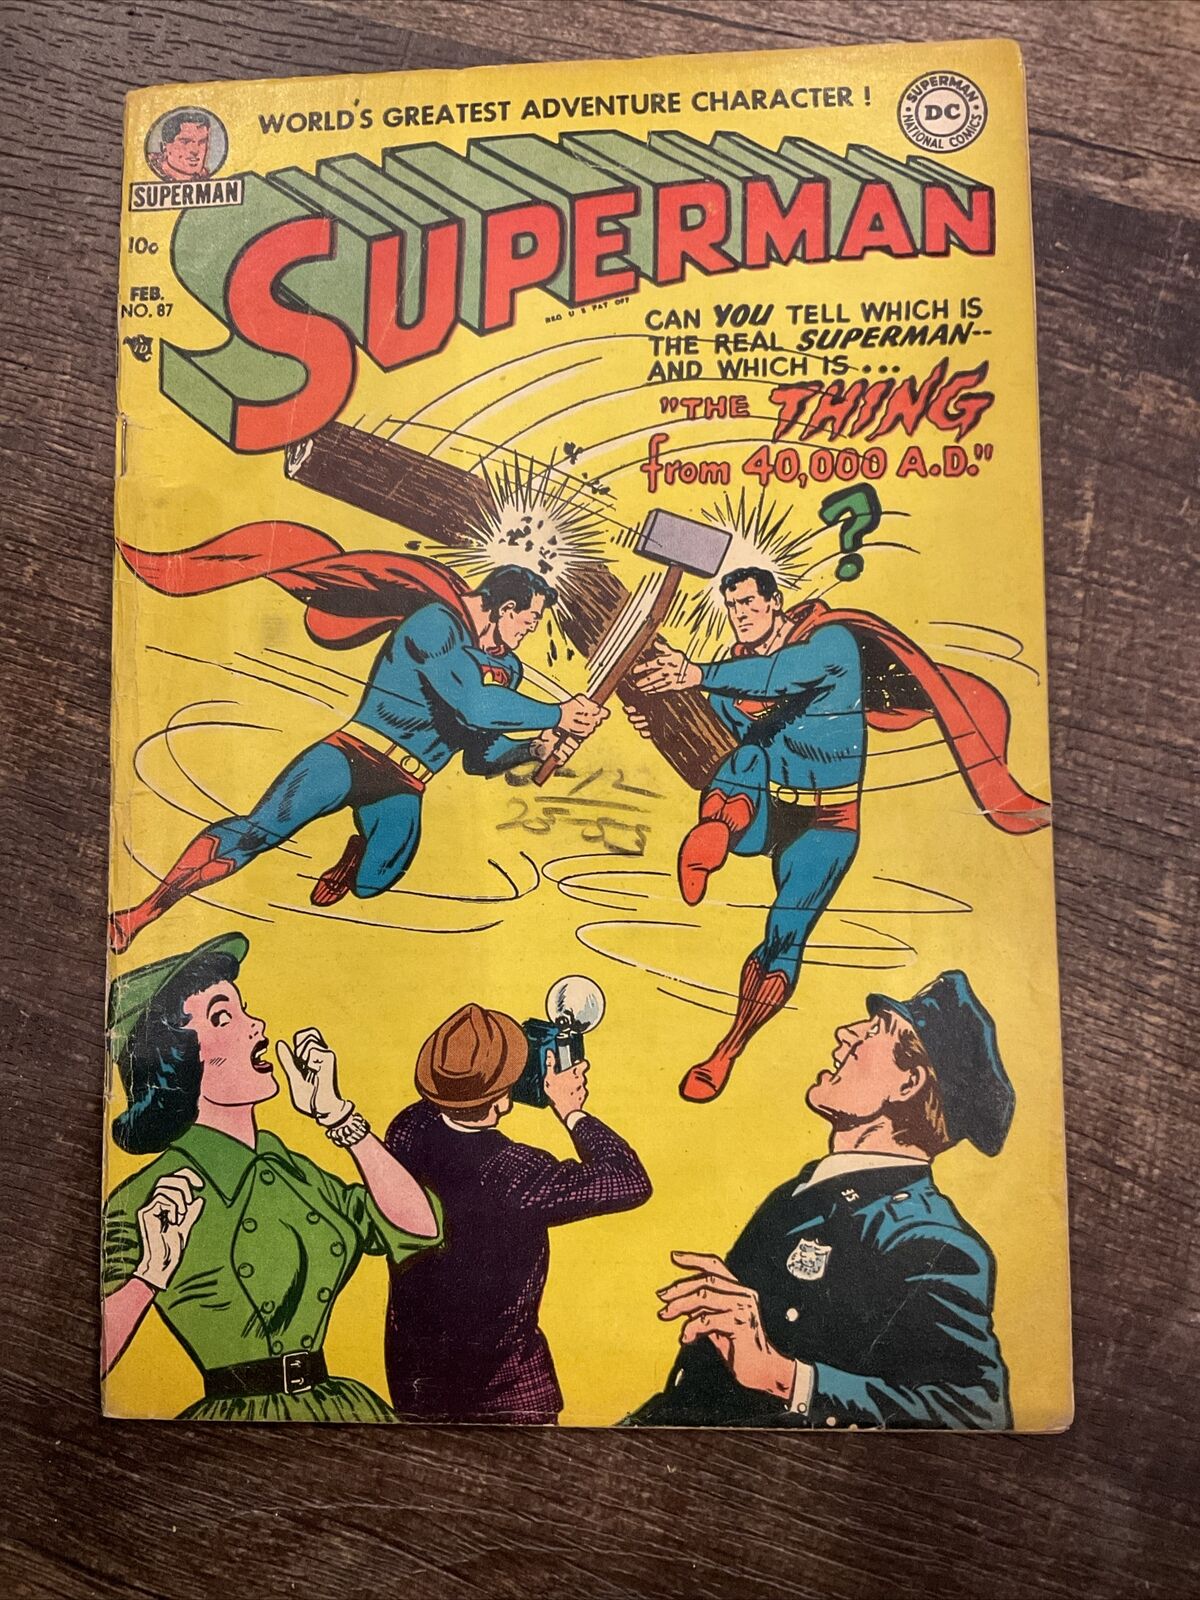 Superman #87 Feb 1954 Golden Age Thing from 4000 AD & Prankster GLOSSY NICE